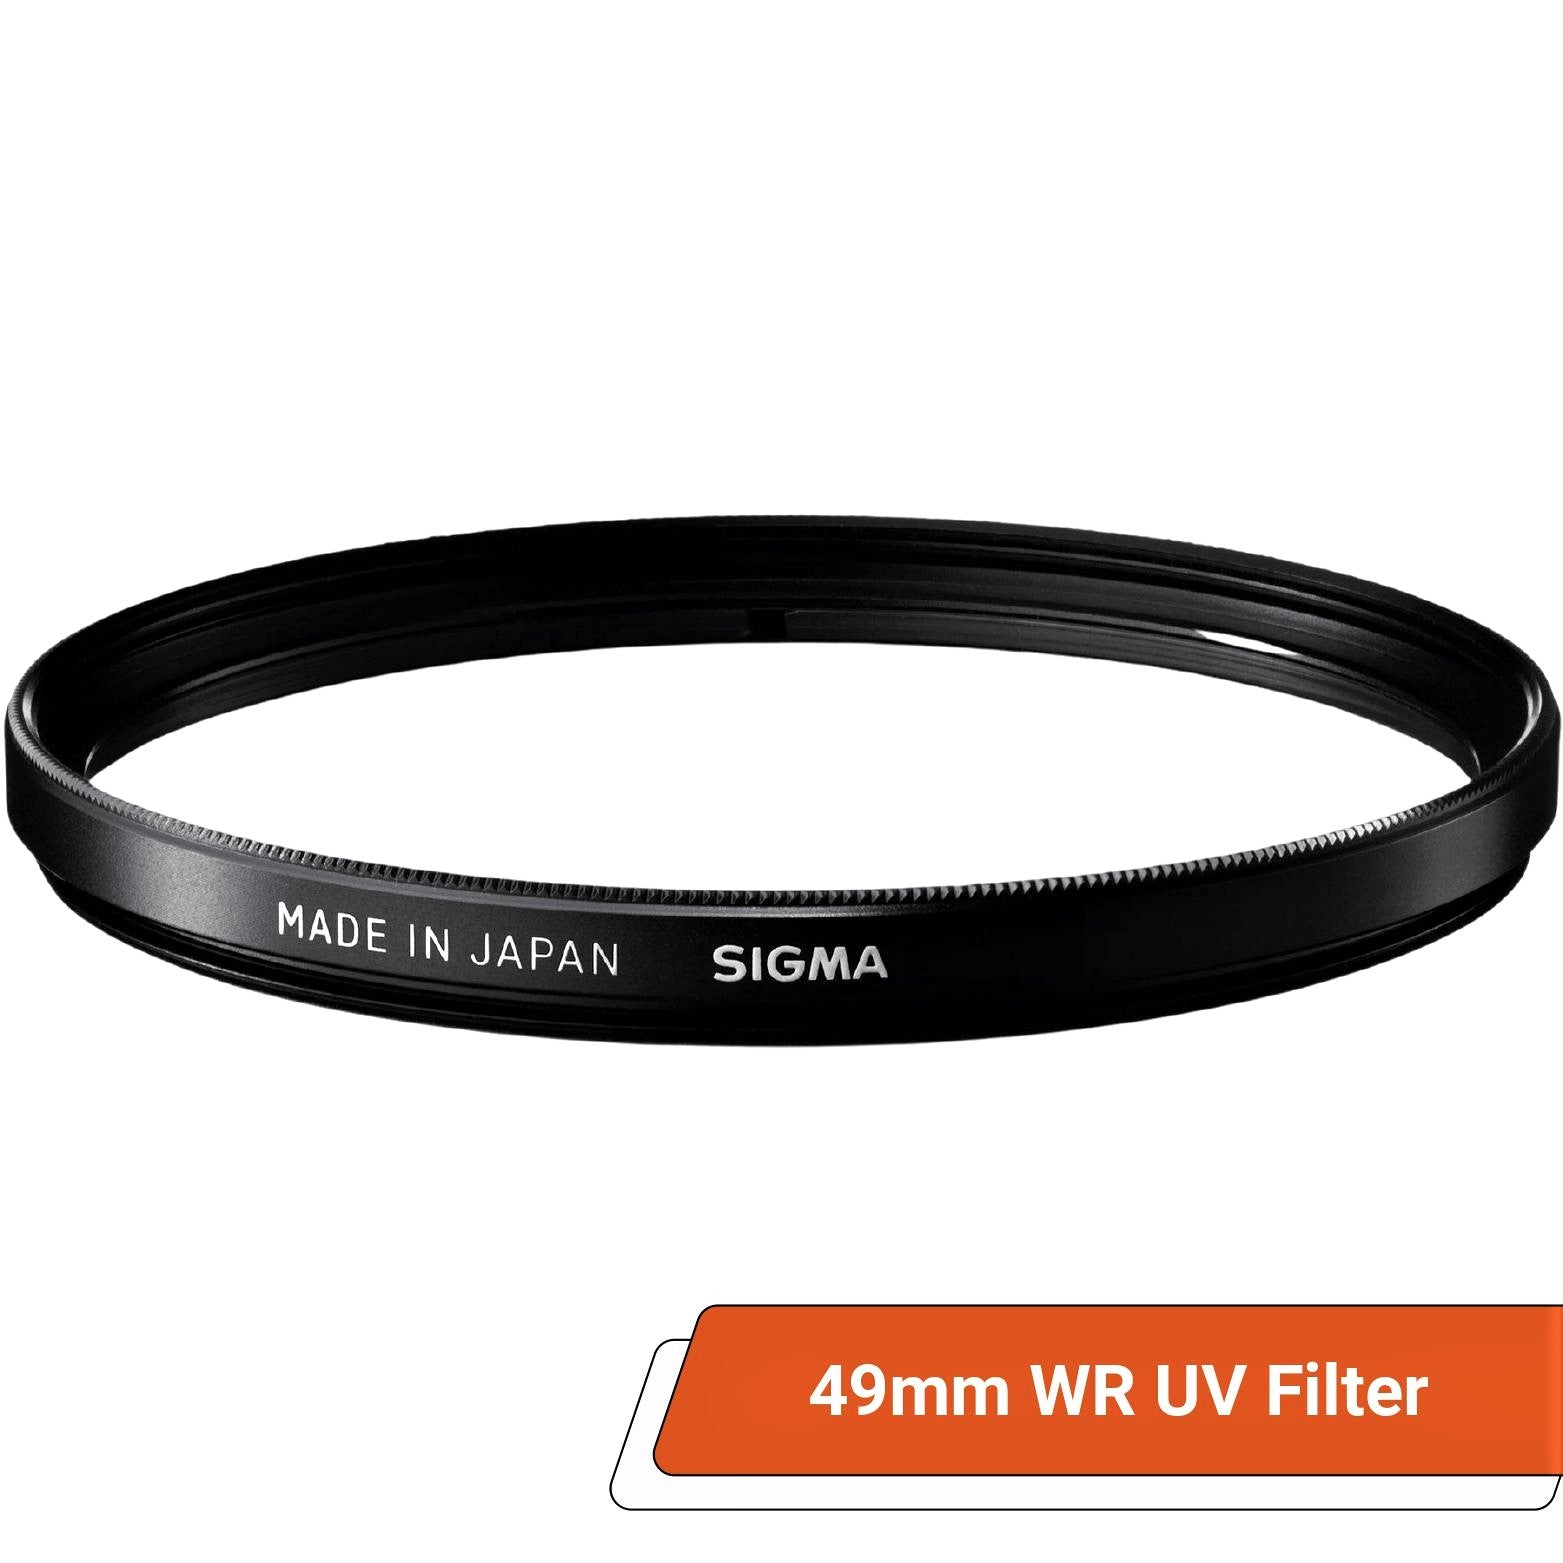 Sigma 49mm WR (Water Repellent) UV Filter